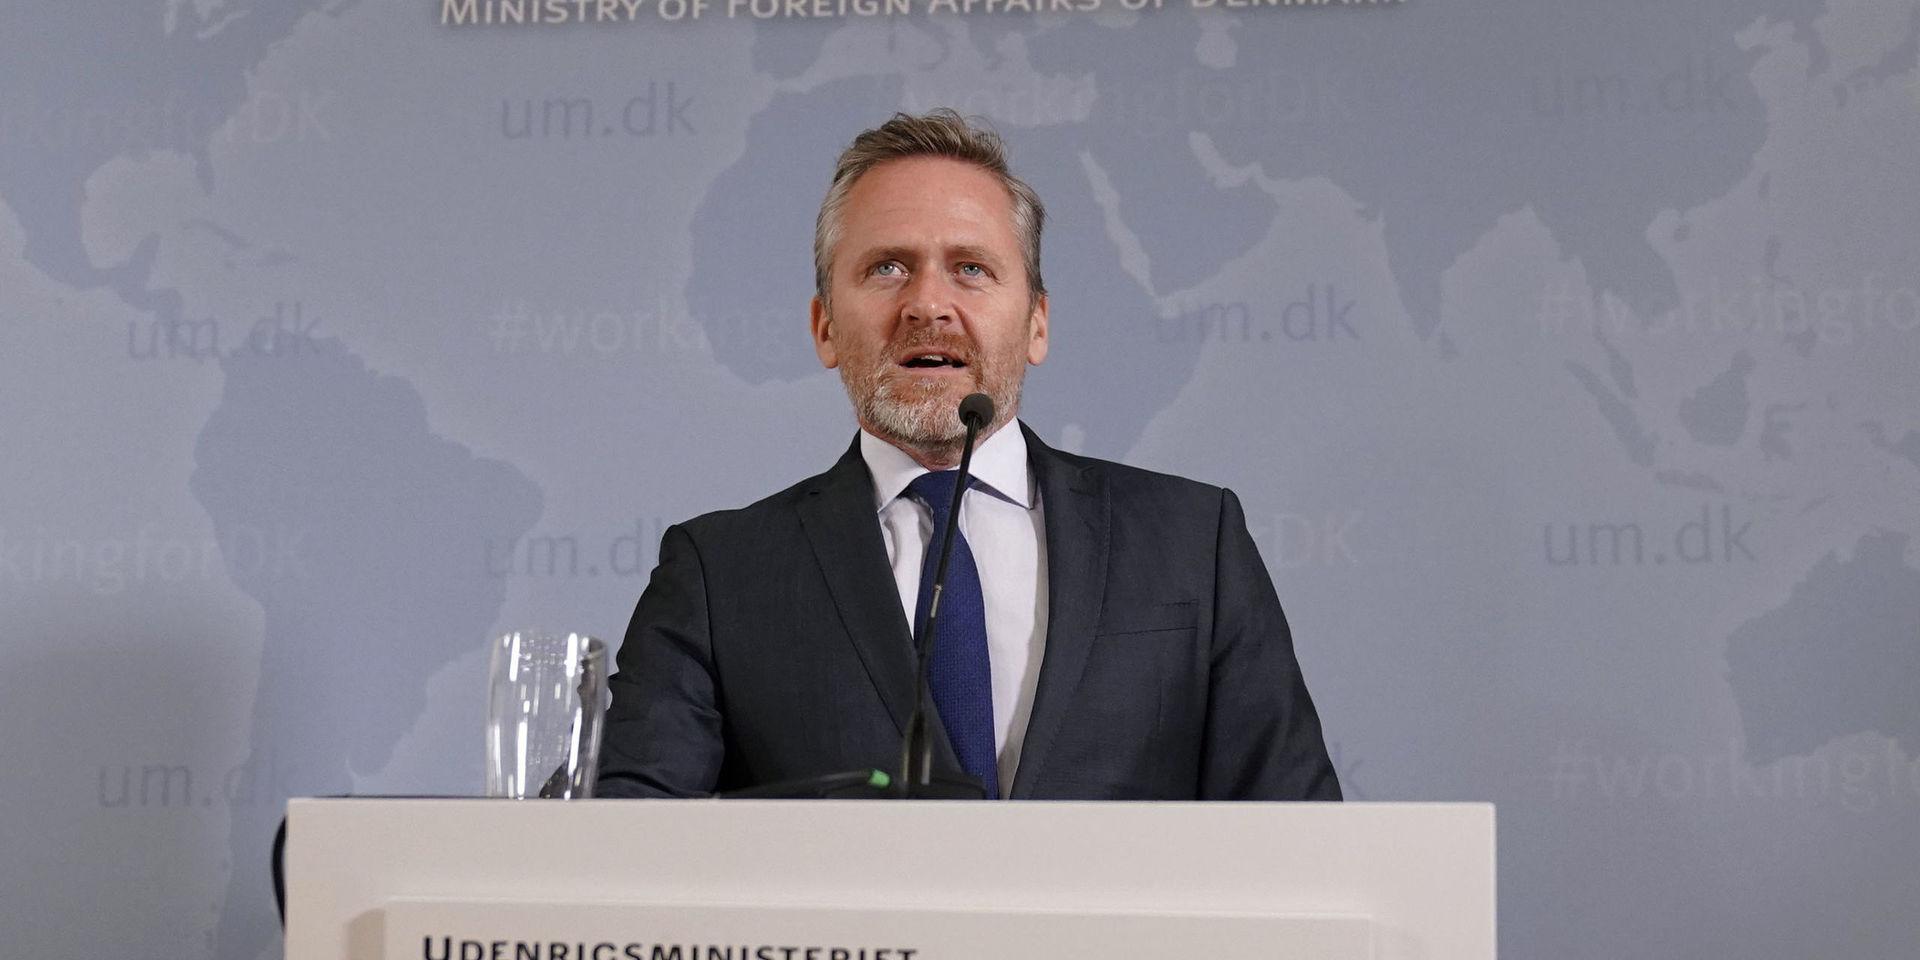 Denmark&apos;s Foreign Minister Anders Samuelsen speaks during a press conference in Eigtveds Pakhus, Copenhagen, Tuesday, Oct. 30, 2018, in connection with a  police operation last month involving a Norwegian citizen of Iranian descent being arrested in an alleged Iranian intelligence plot to kill an opposition activist in Denmark. (Martin Sylvest/Ritzau Scanpix via AP)